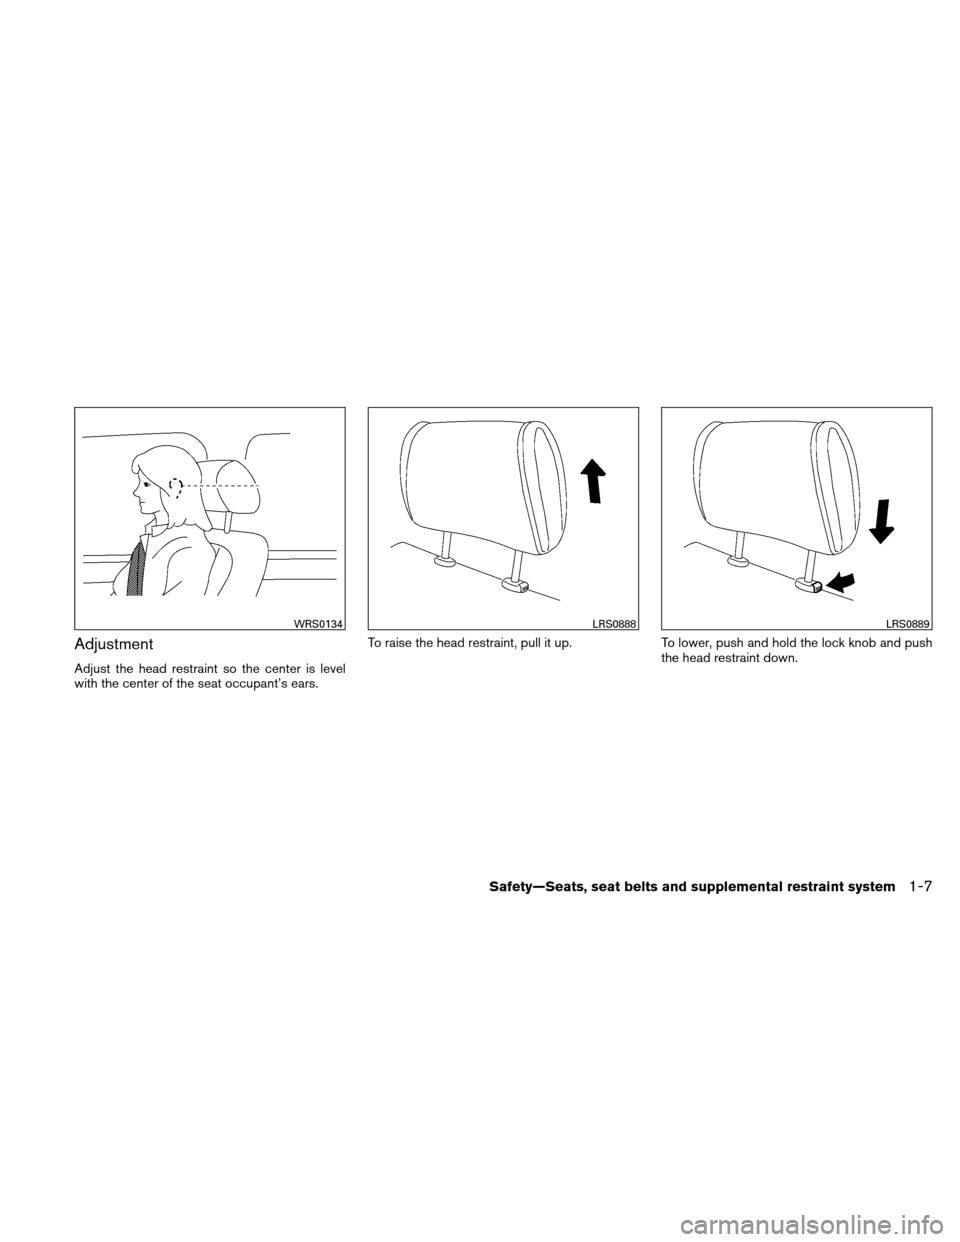 NISSAN ALTIMA HYBRID 2010 L32A / 4.G Owners Guide Adjustment
Adjust the head restraint so the center is level
with the center of the seat occupant’s ears.To raise the head restraint, pull it up.
To lower, push and hold the lock knob and push
the he